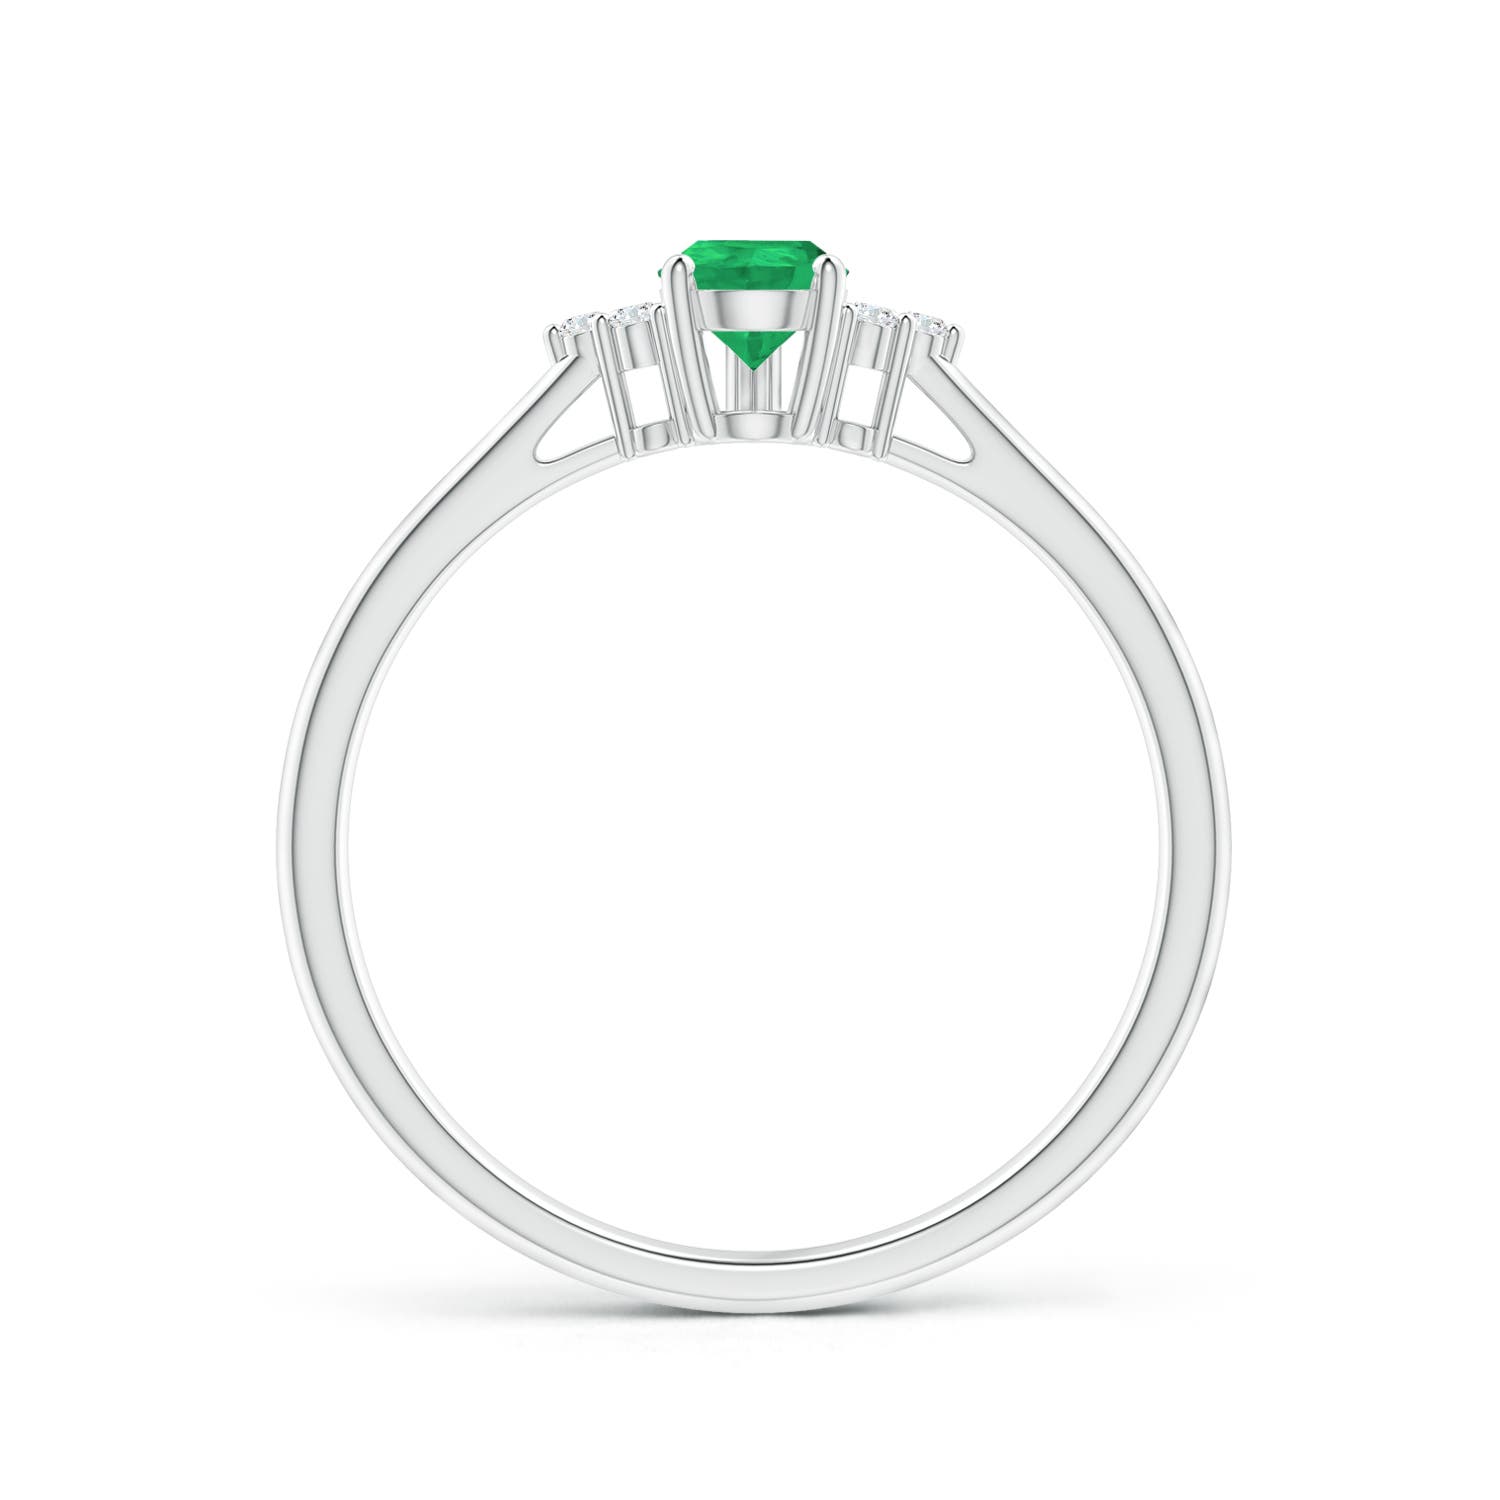 A - Emerald / 0.4 CT / 14 KT White Gold